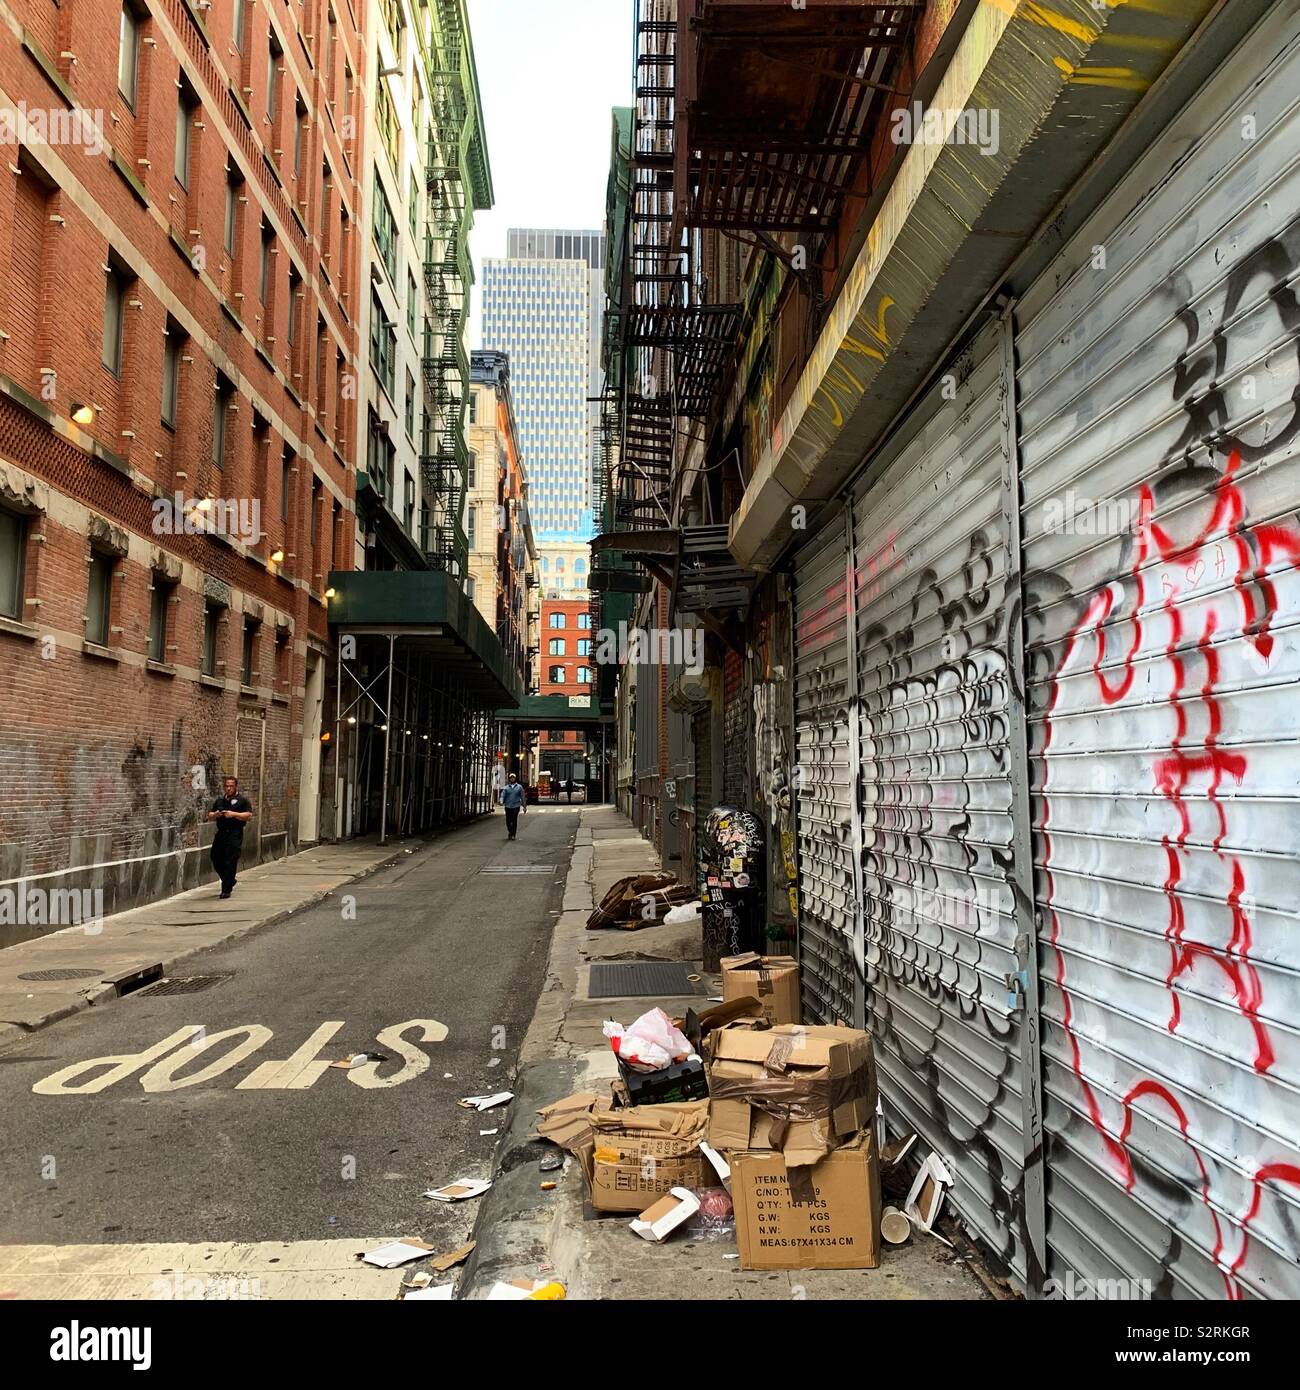 Cortlandt Alley, Manhattan, New York City, The alley has often served as a film set, largely because the city has few actual alleys, but high Hollywood demand for New York alley crime scenes. Stock Photo